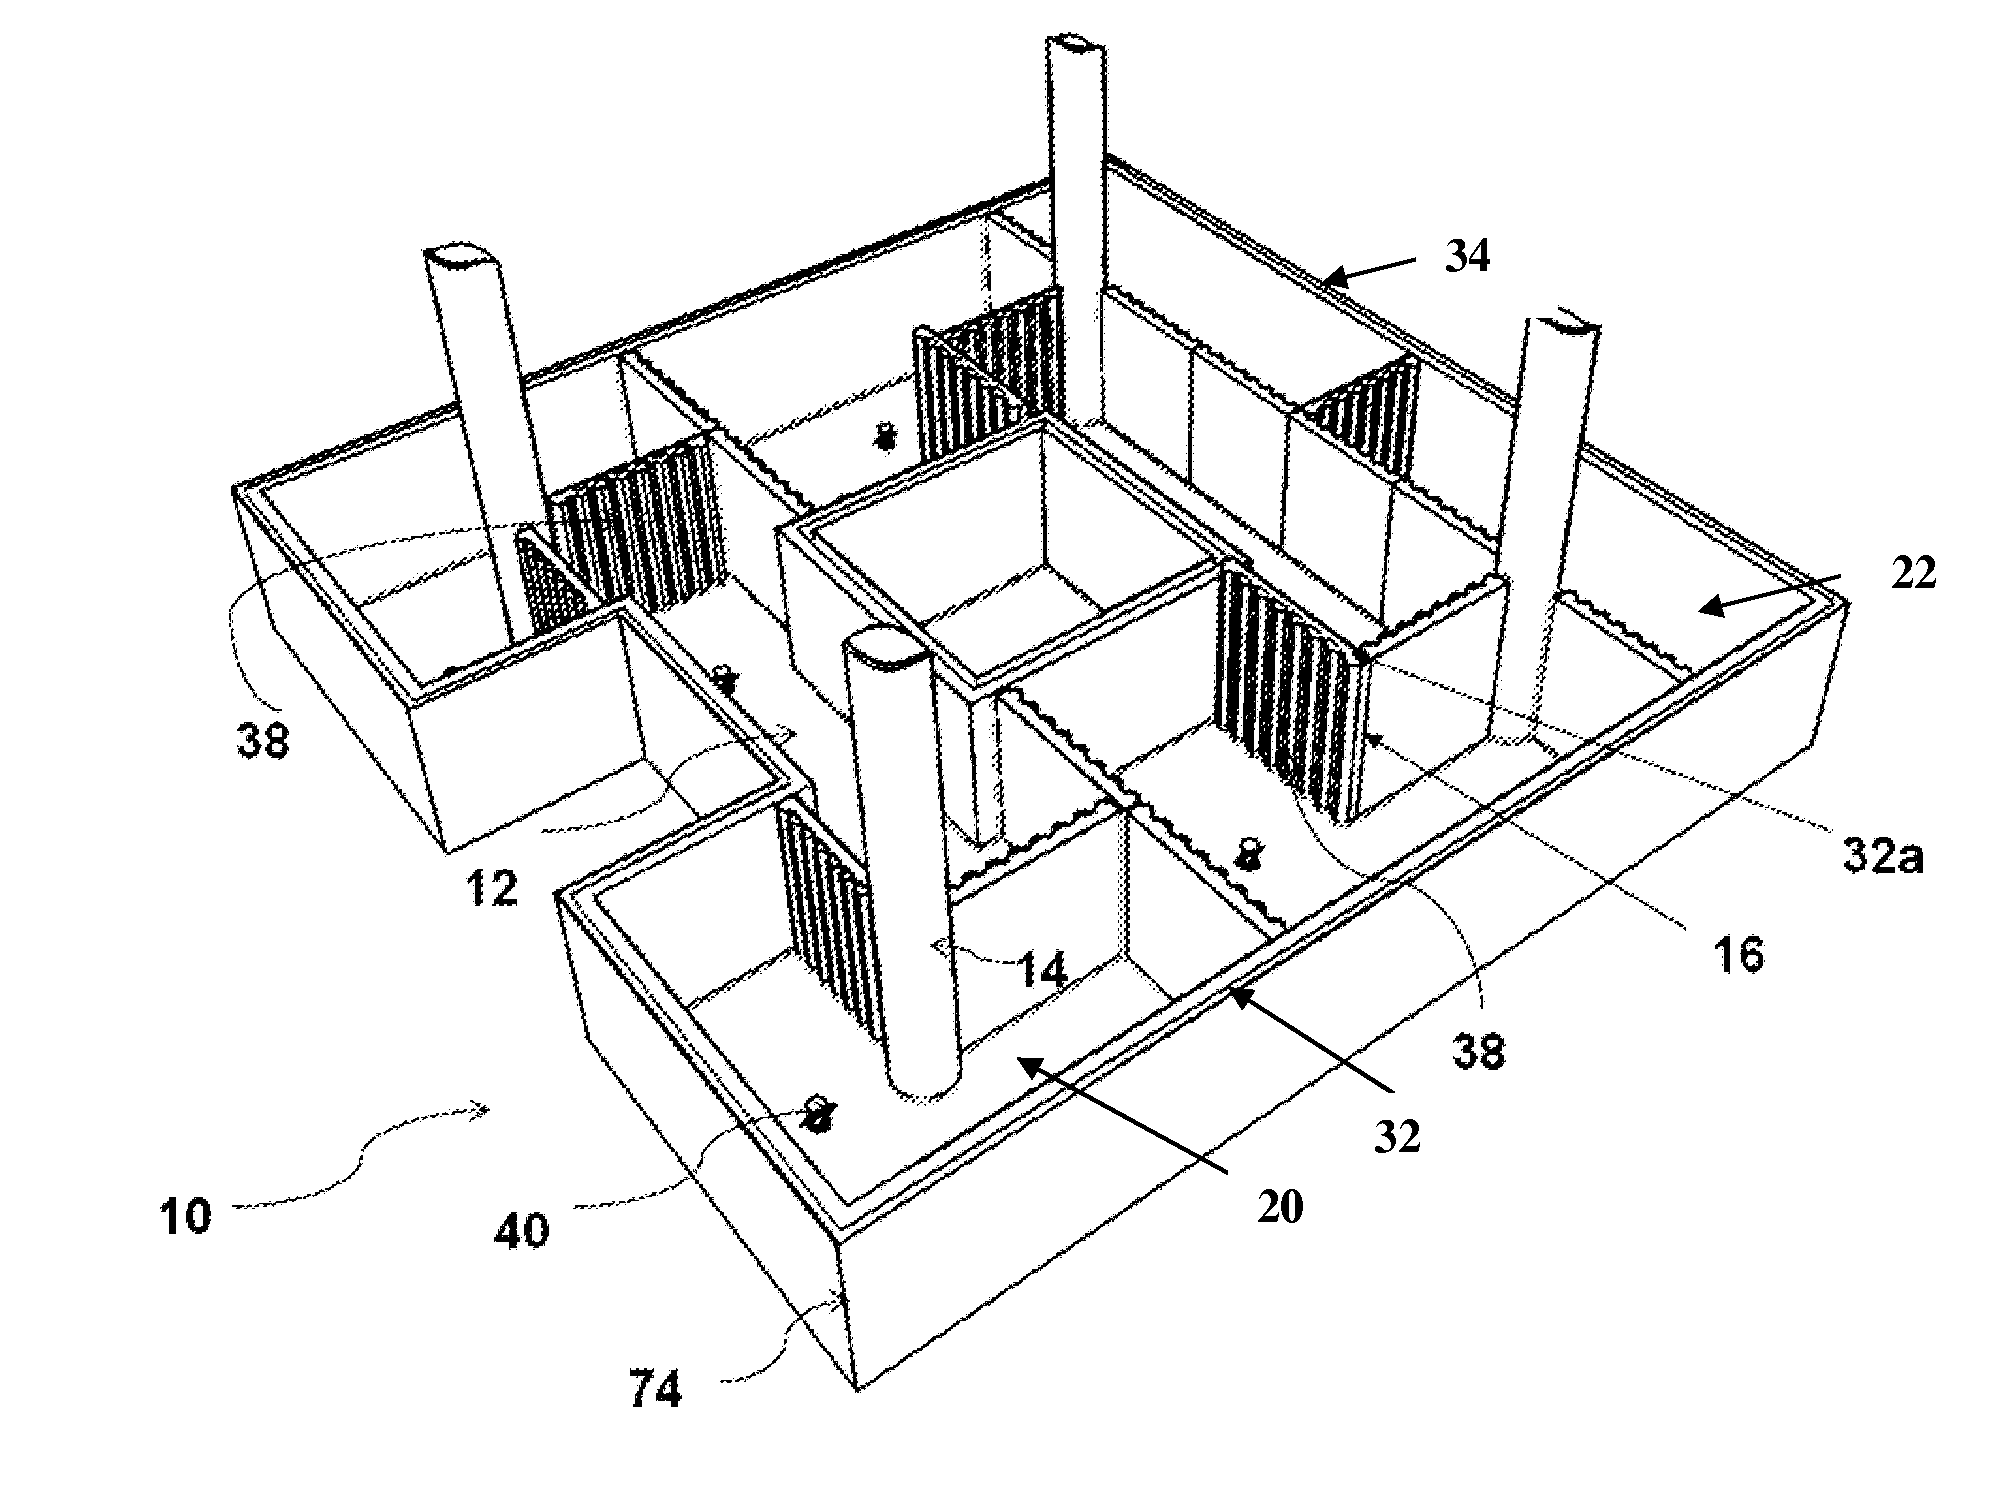 Enclosed offshore tank for storing crude oil